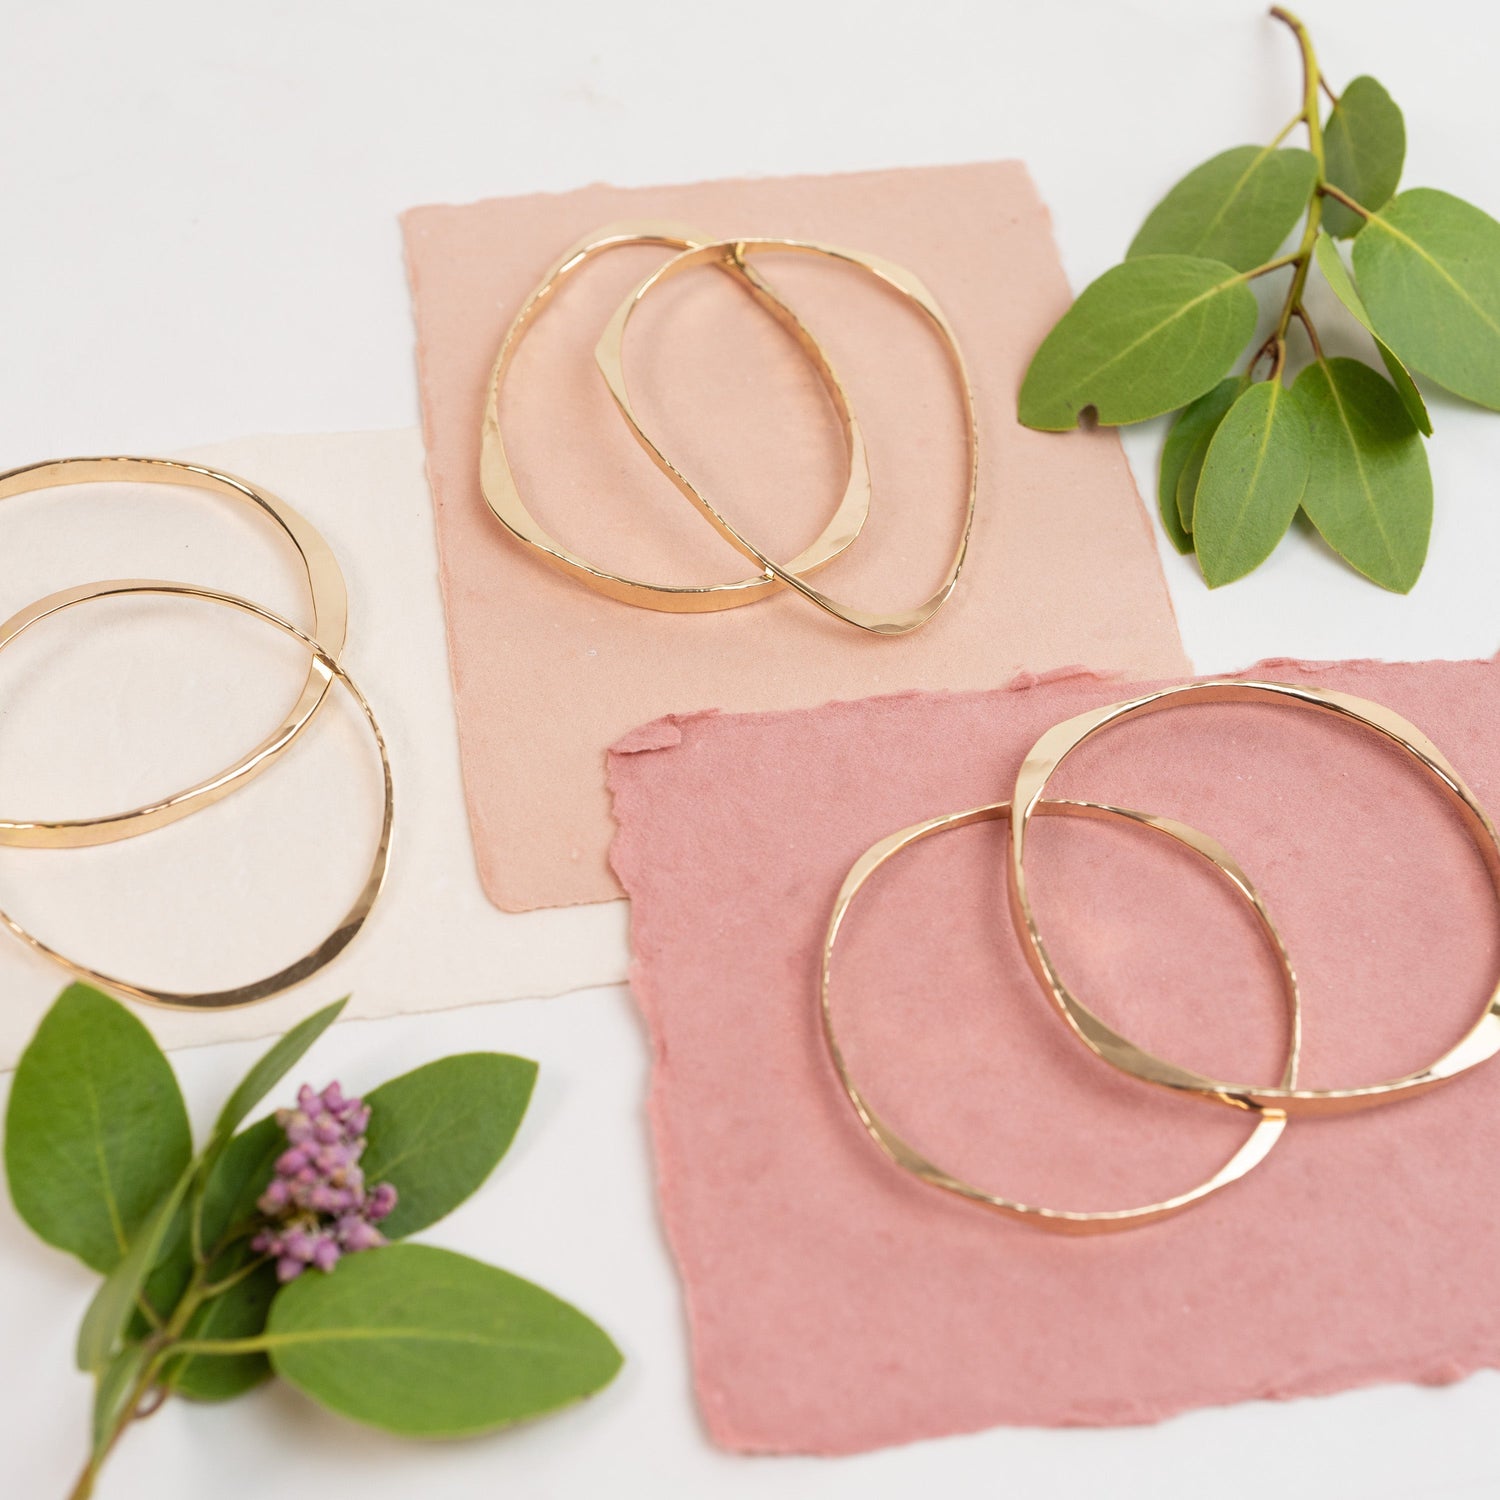 Bangle Bracelets - 14k Solid Yellow Gold Collection